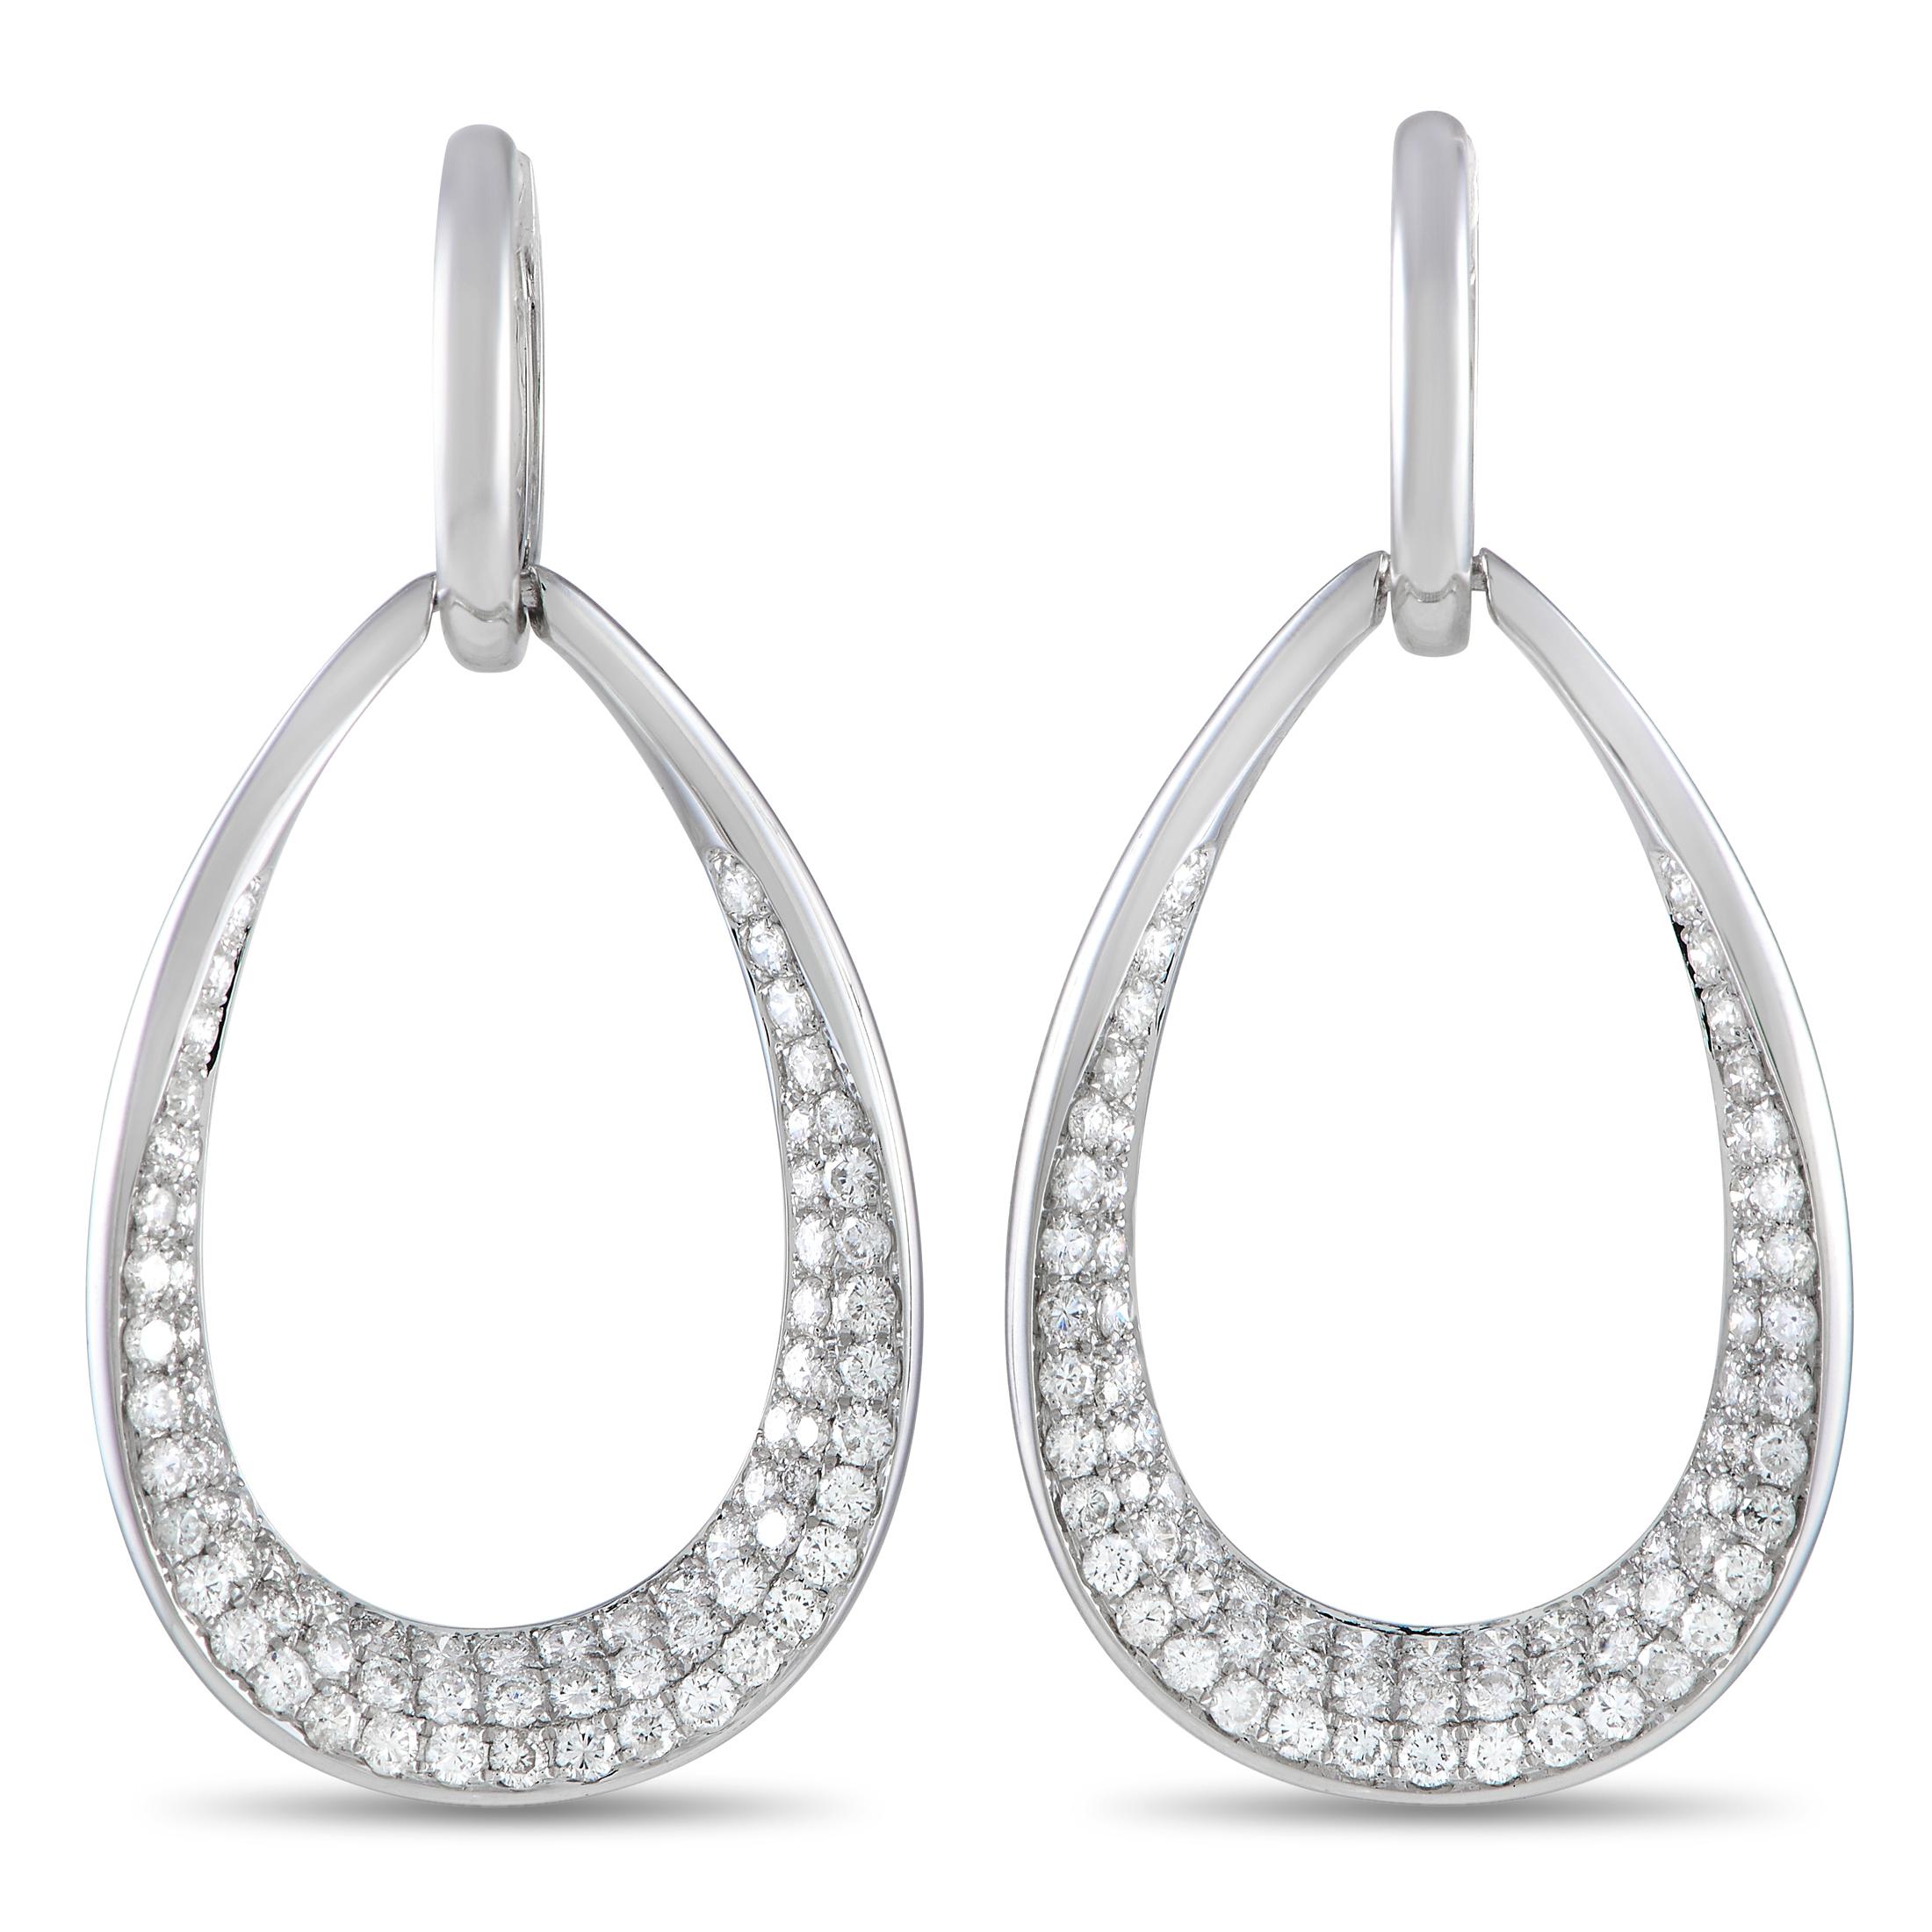 LB Exclusive 18k White Gold 3.05ct Diamond Drop Earrings In New Condition For Sale In Southampton, PA